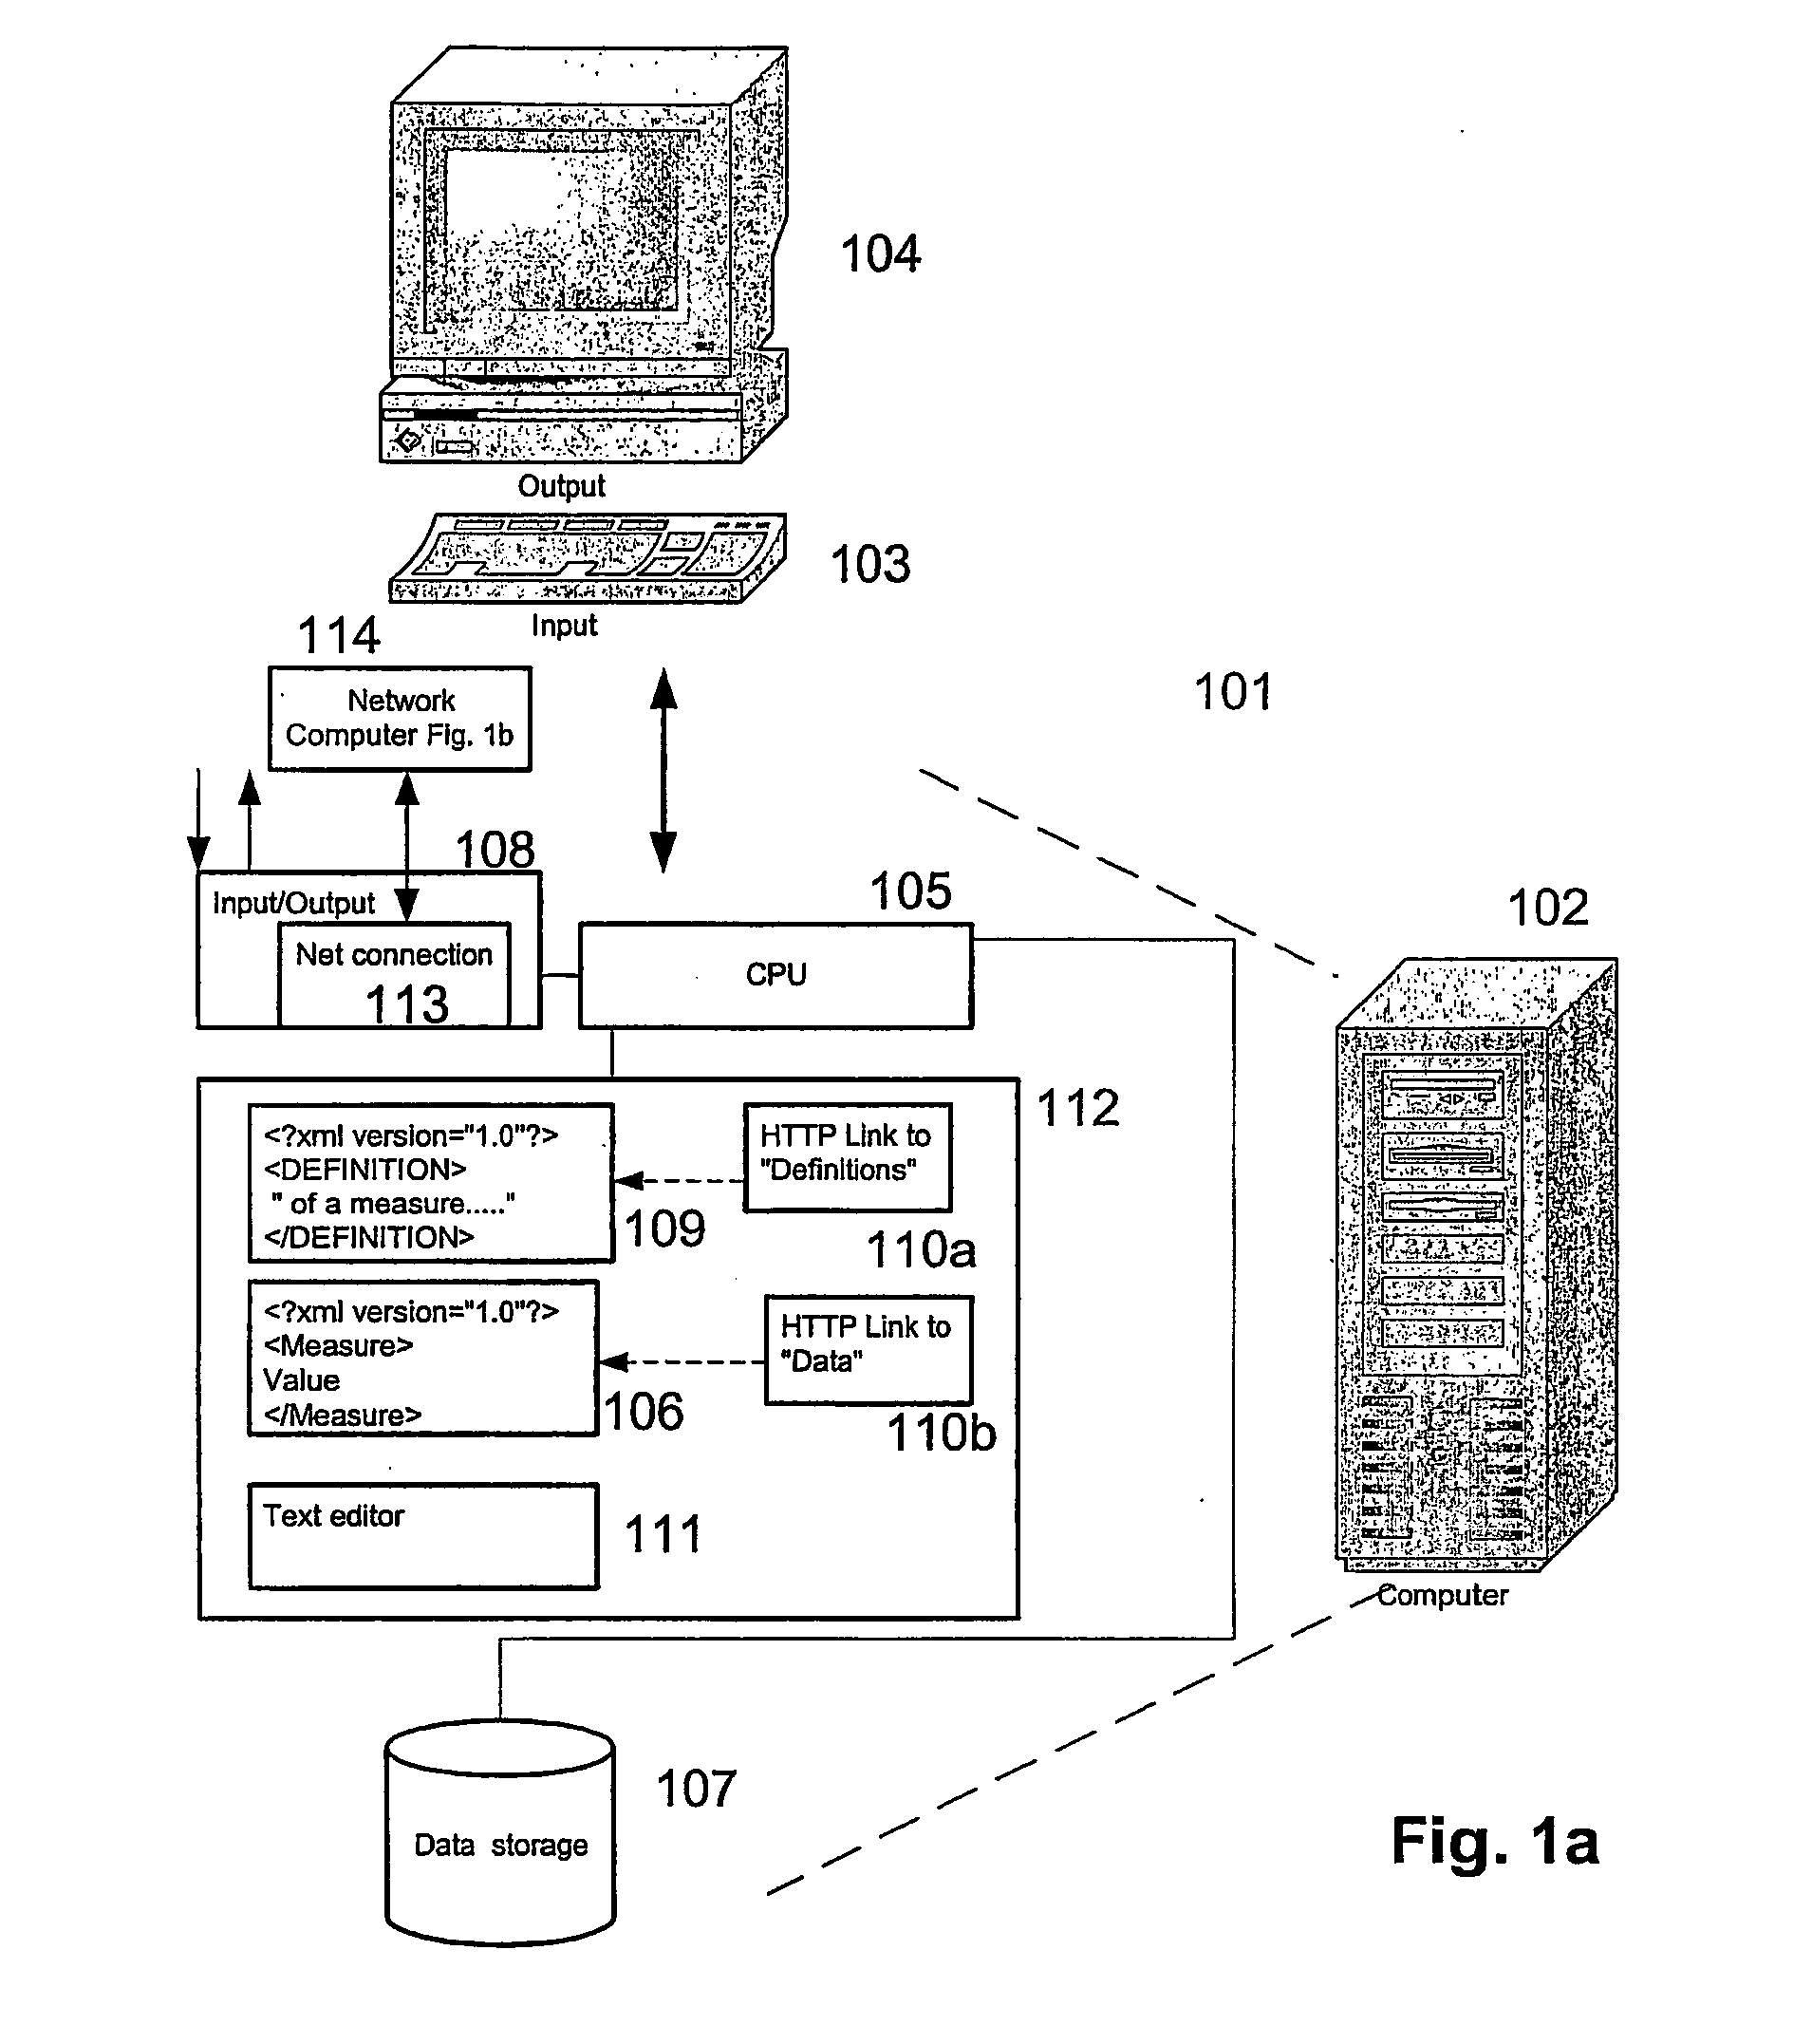 Method, software application and system for incorporating benchmark data into a business software application